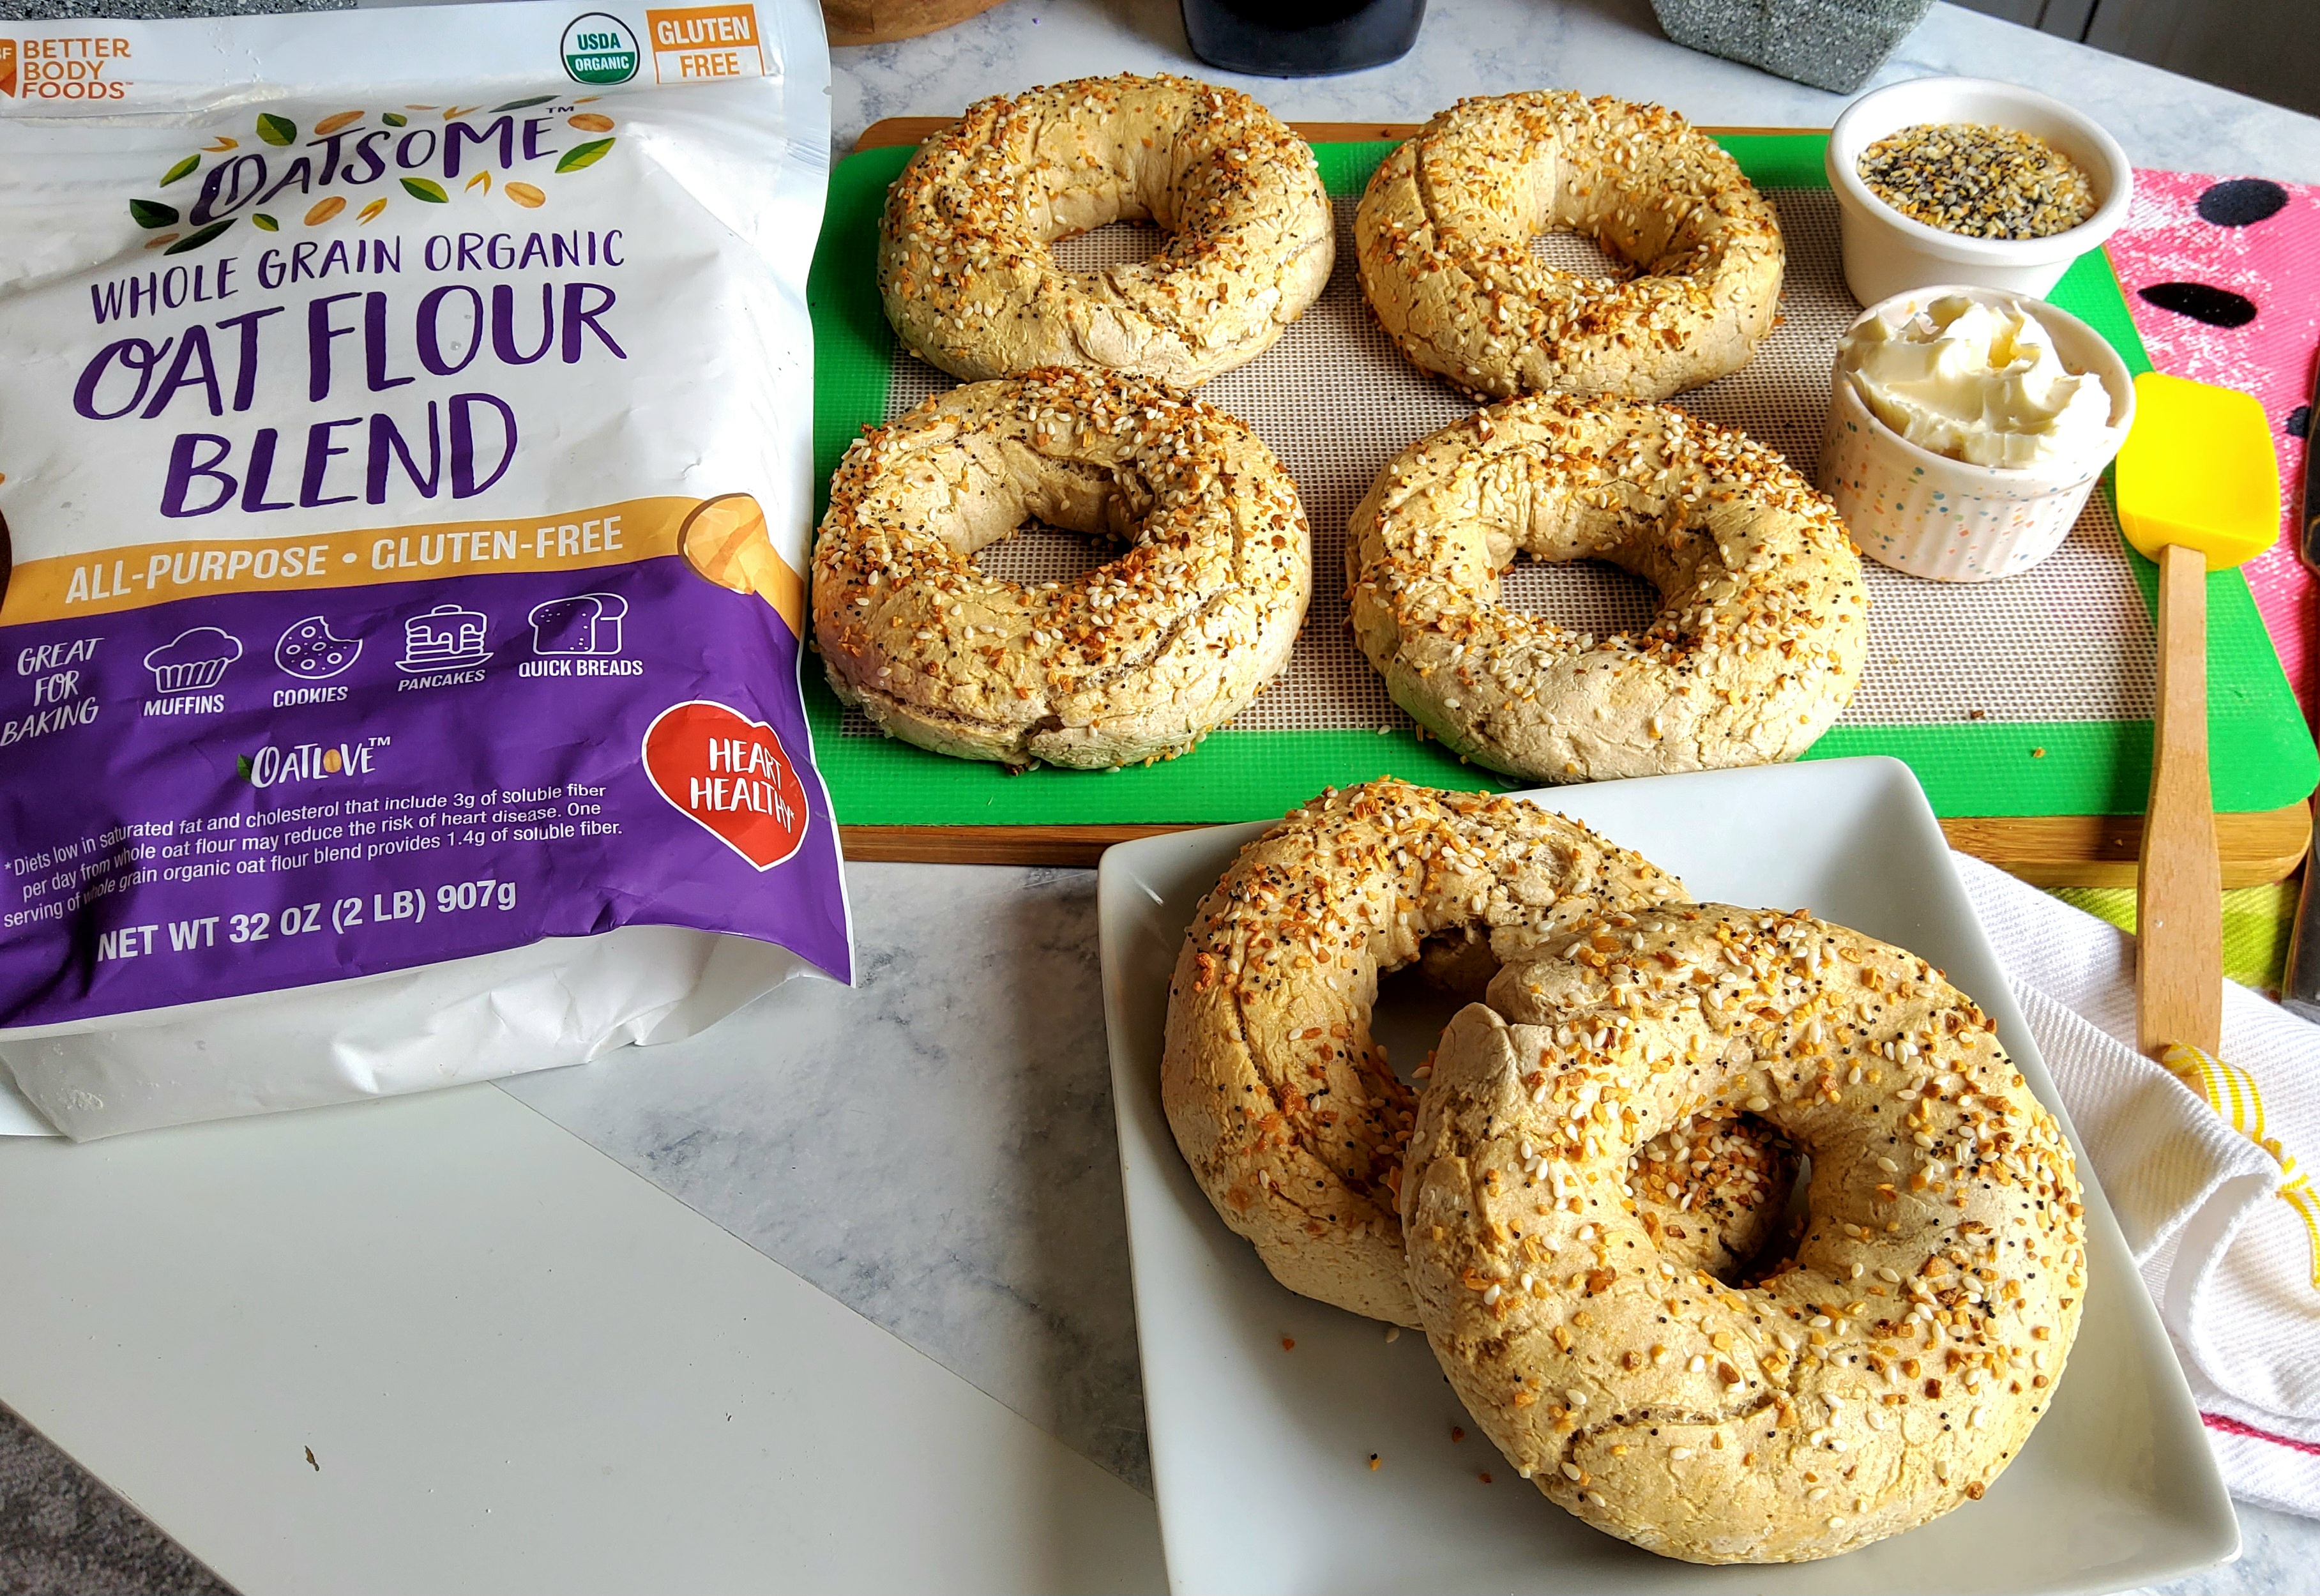 Bagel Makers Learn to Live Gluten Free